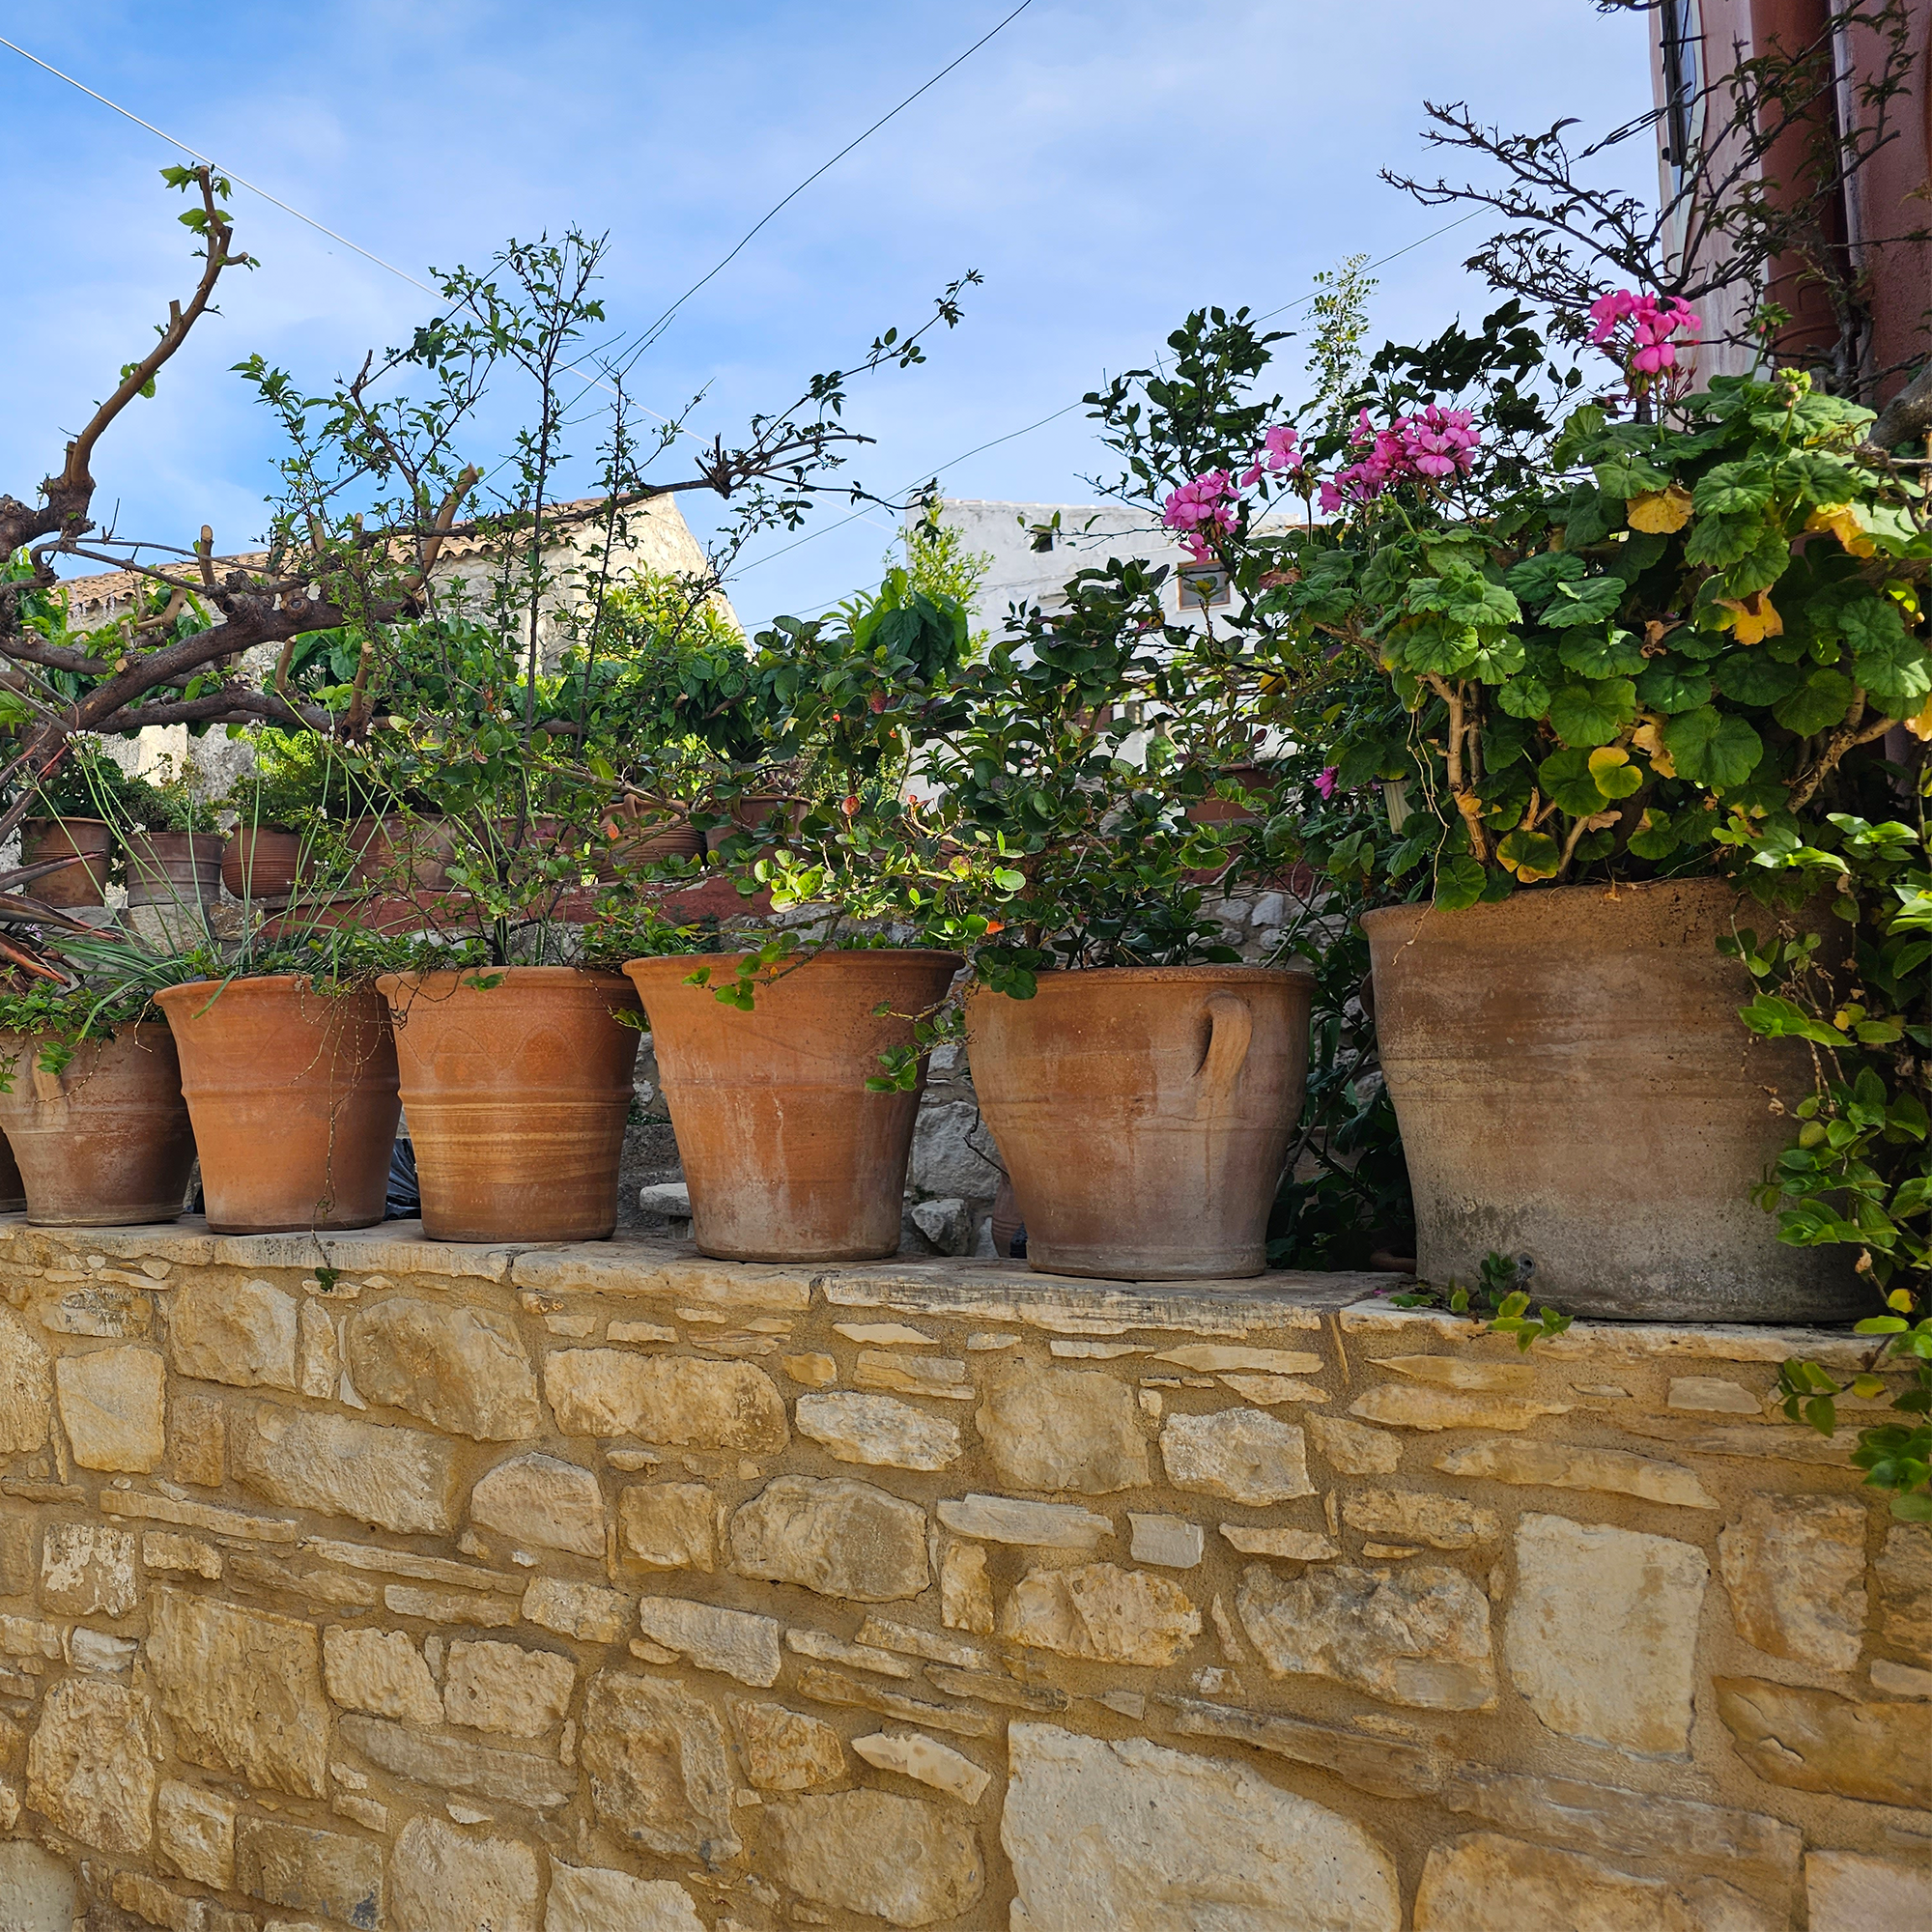 Discover the timeless charm of clay pots